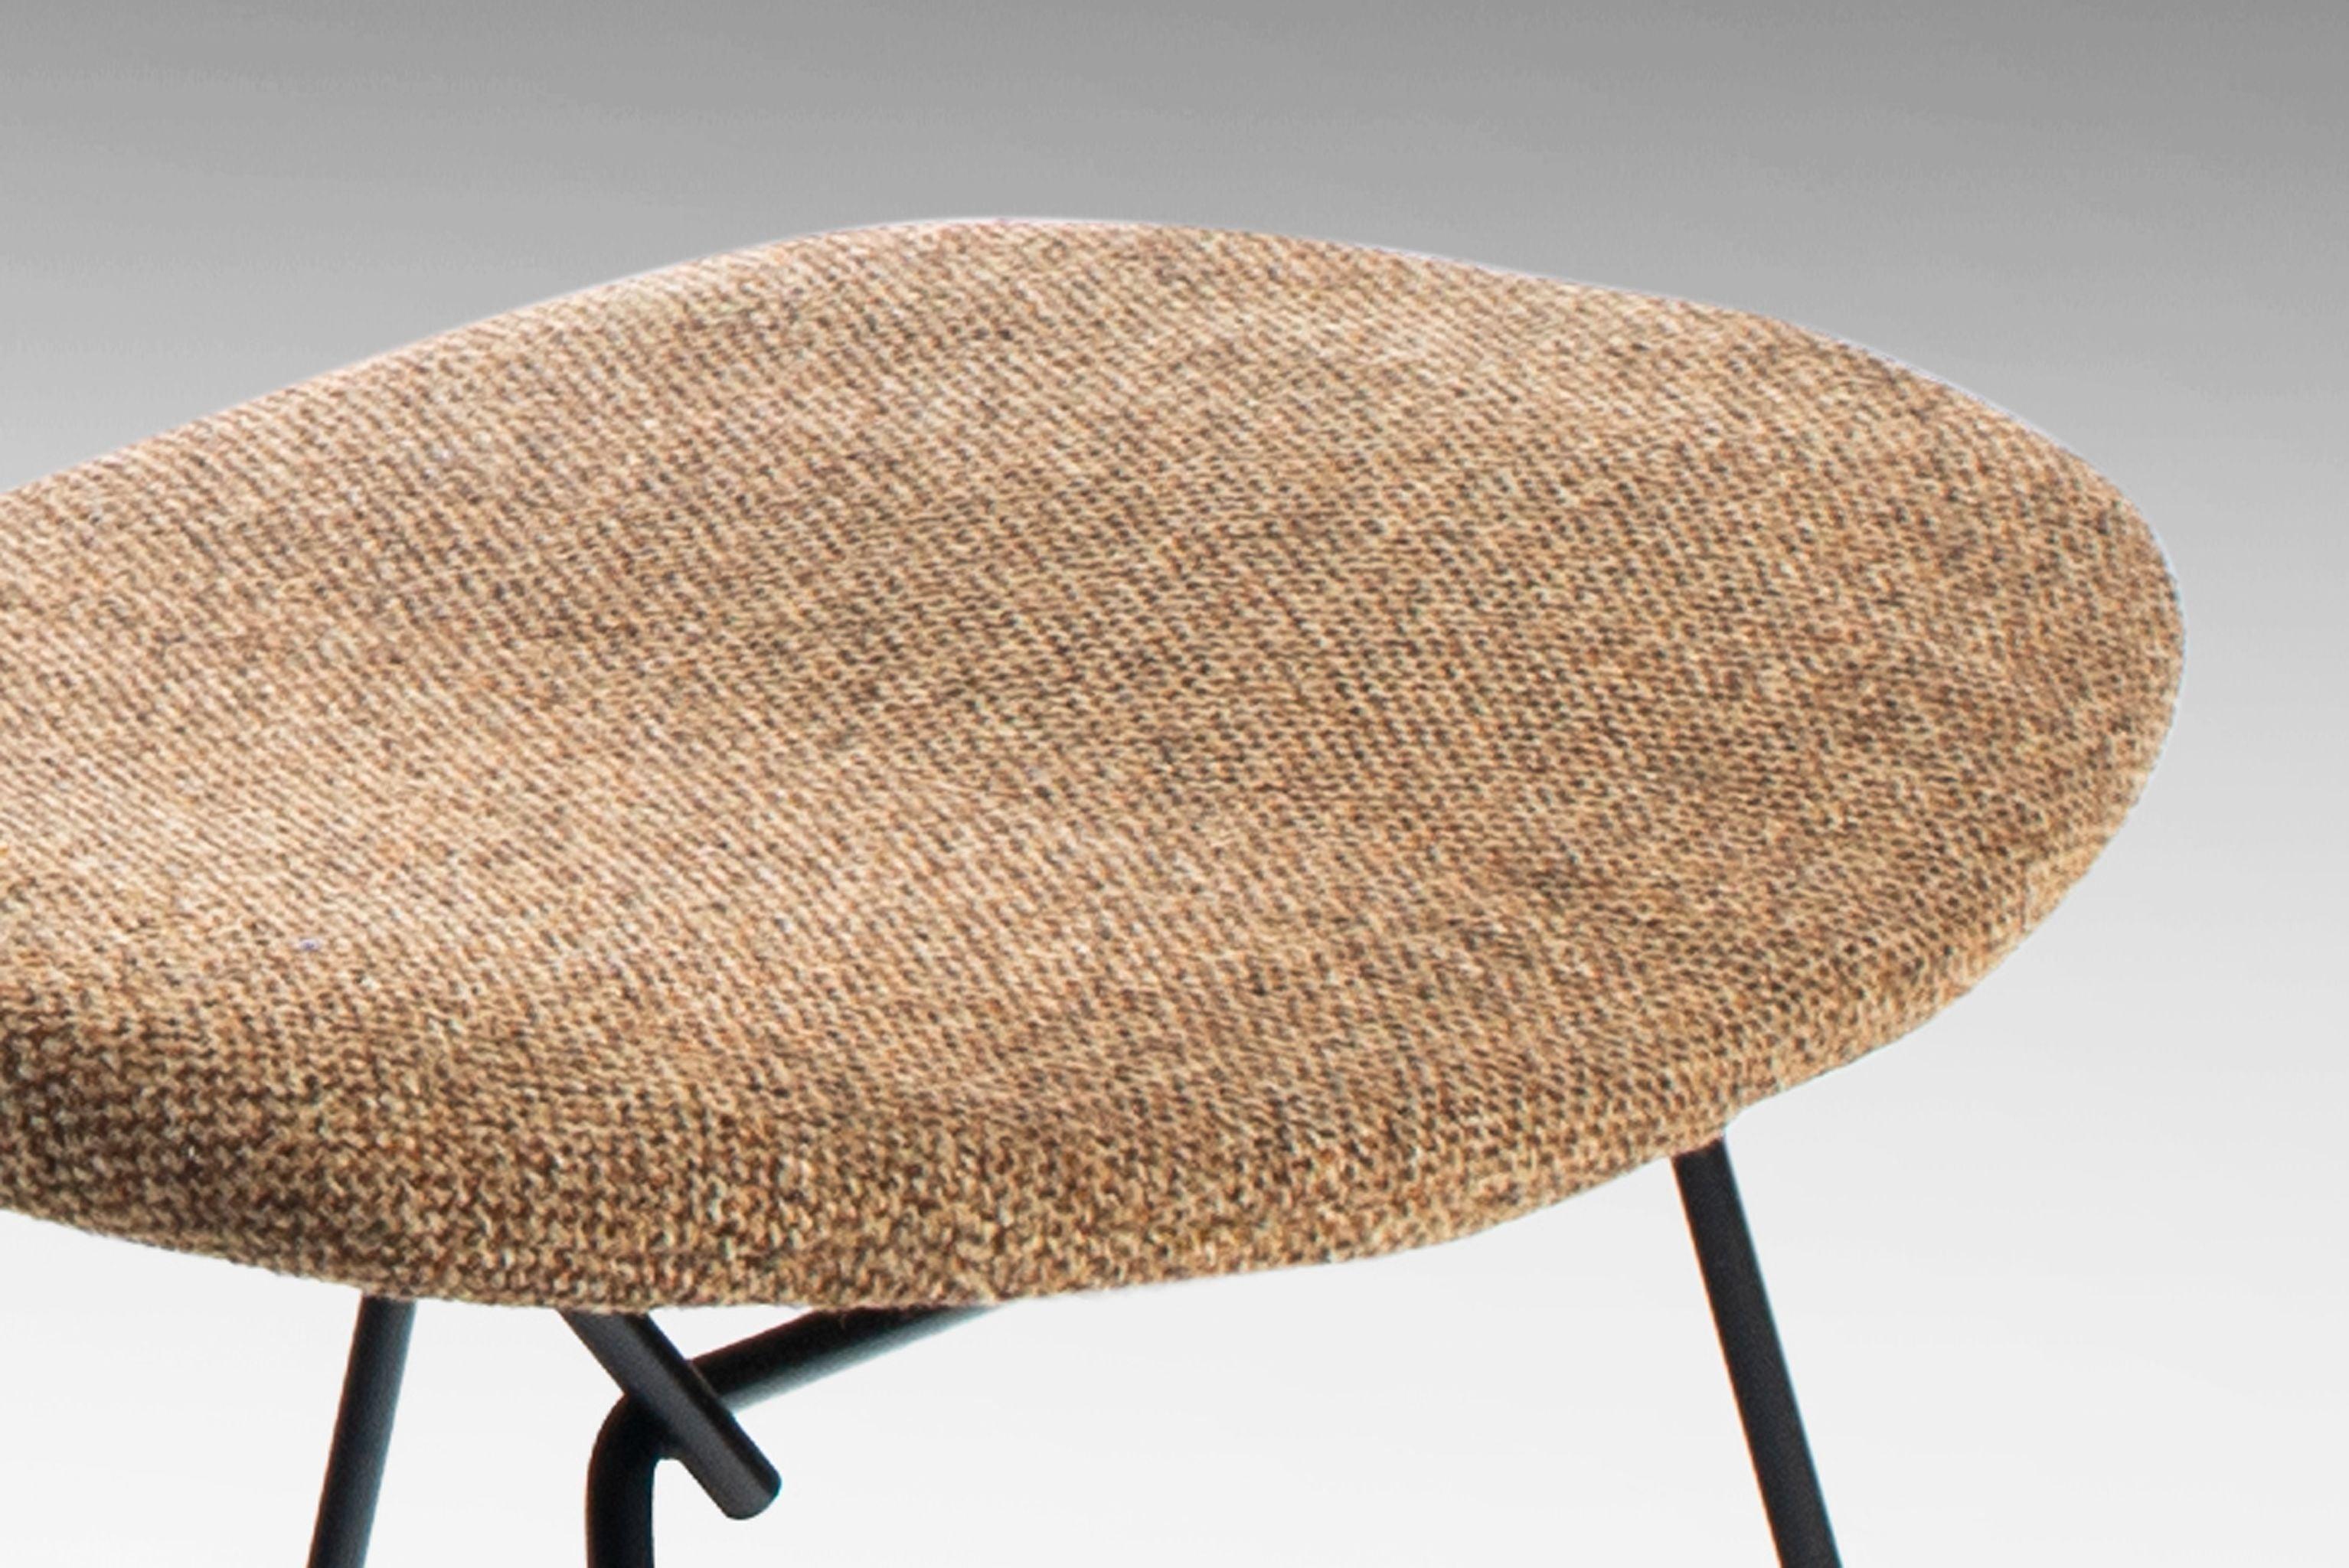 Authentic Bird Lounge Chair and Ottoman by Harry Bertoia for Knoll, USA, 1960s For Sale 10